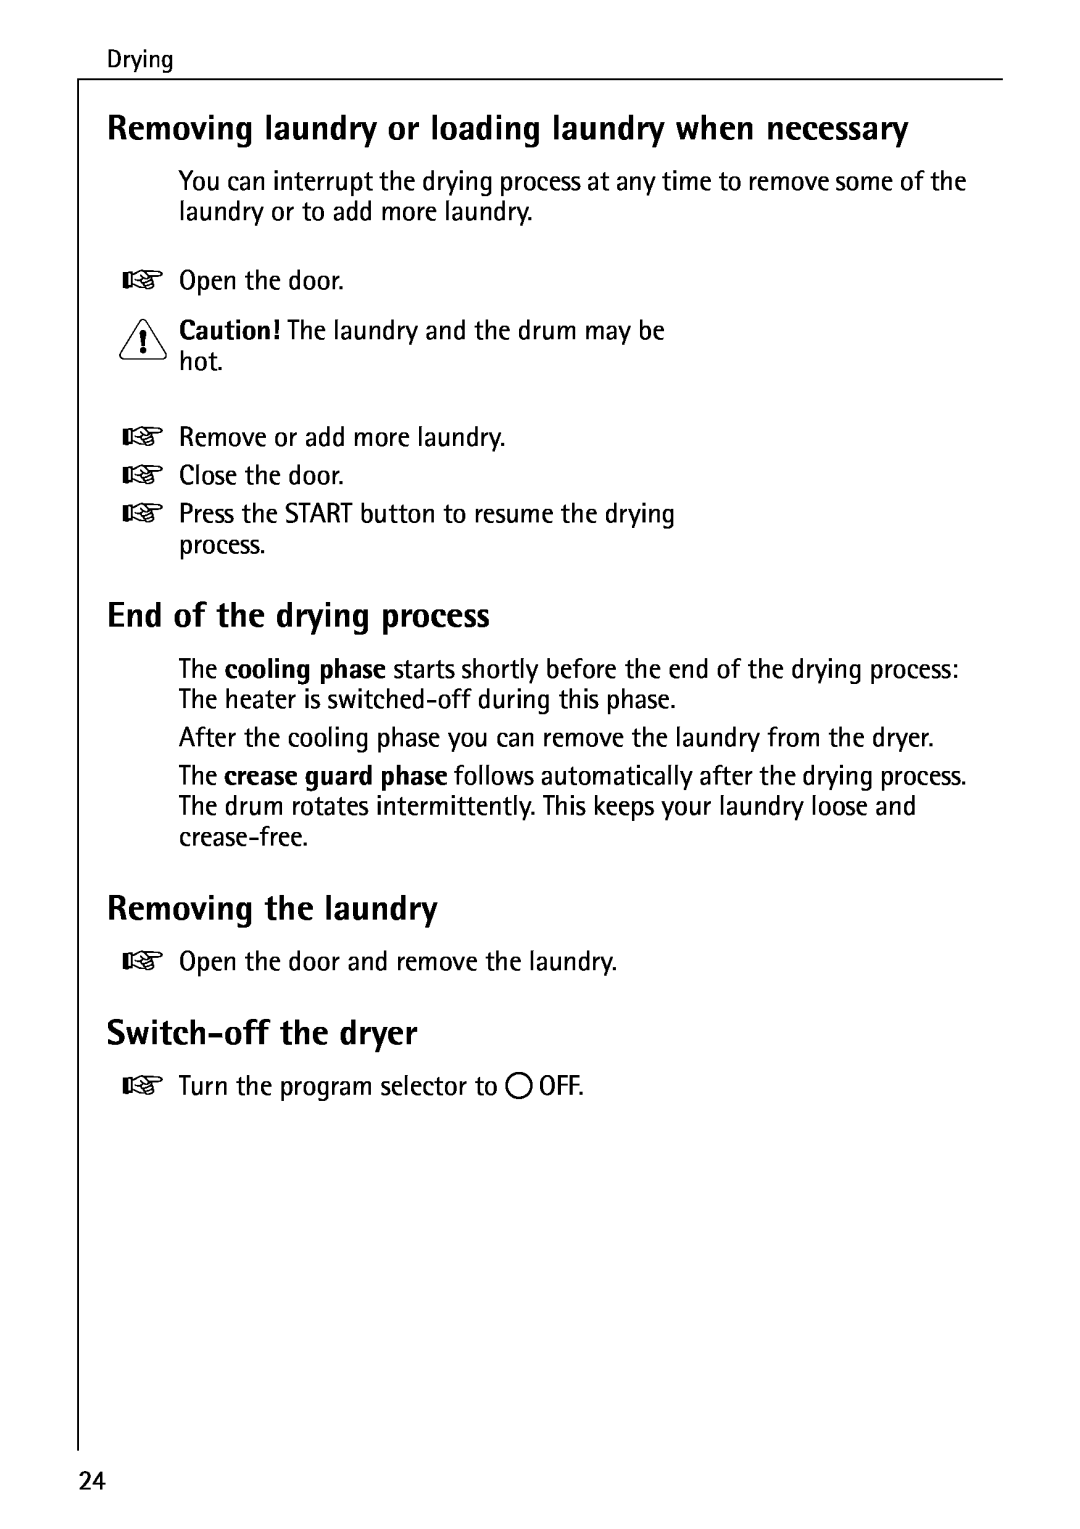 AEG 33600 Removing laundry or loading laundry when necessary, End of the drying process, Removing the laundry 